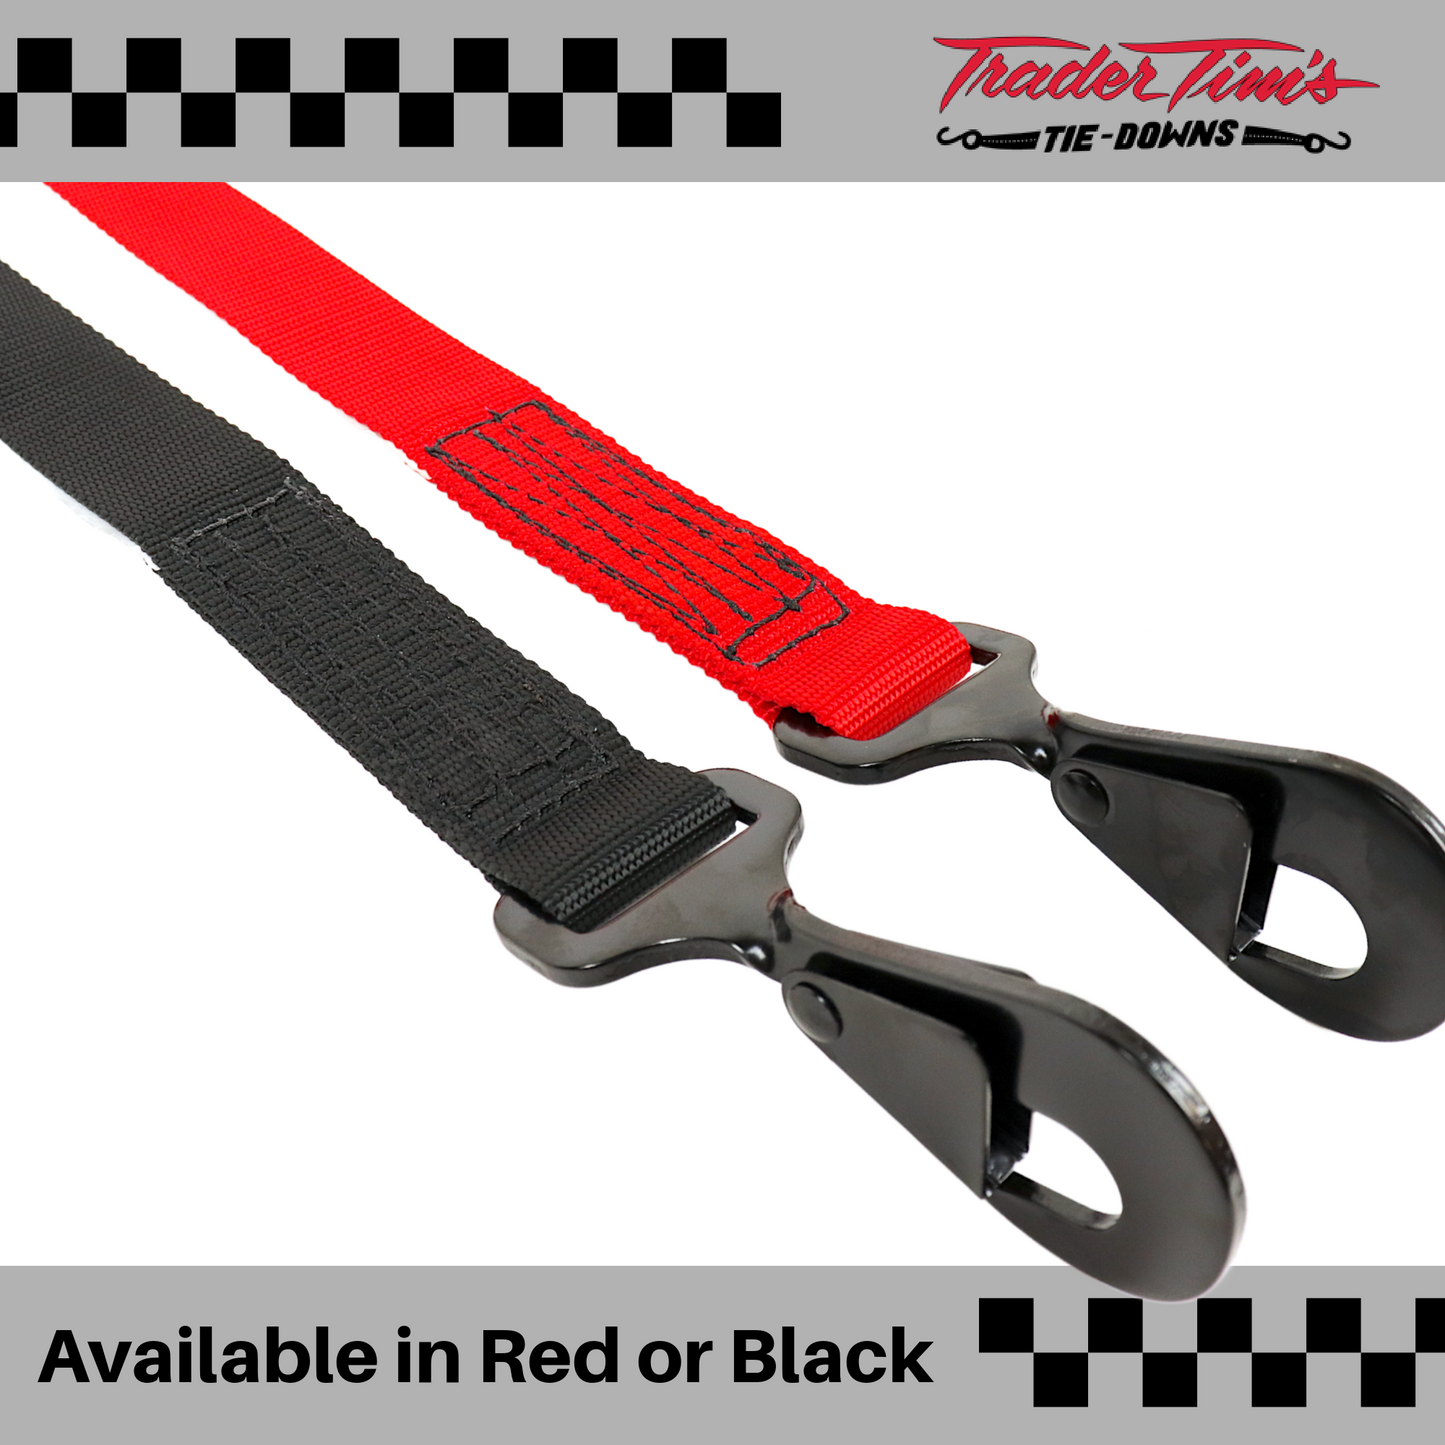 1.5" x 4' Adjustable Tie-Back with Soft Tie - Red or Black